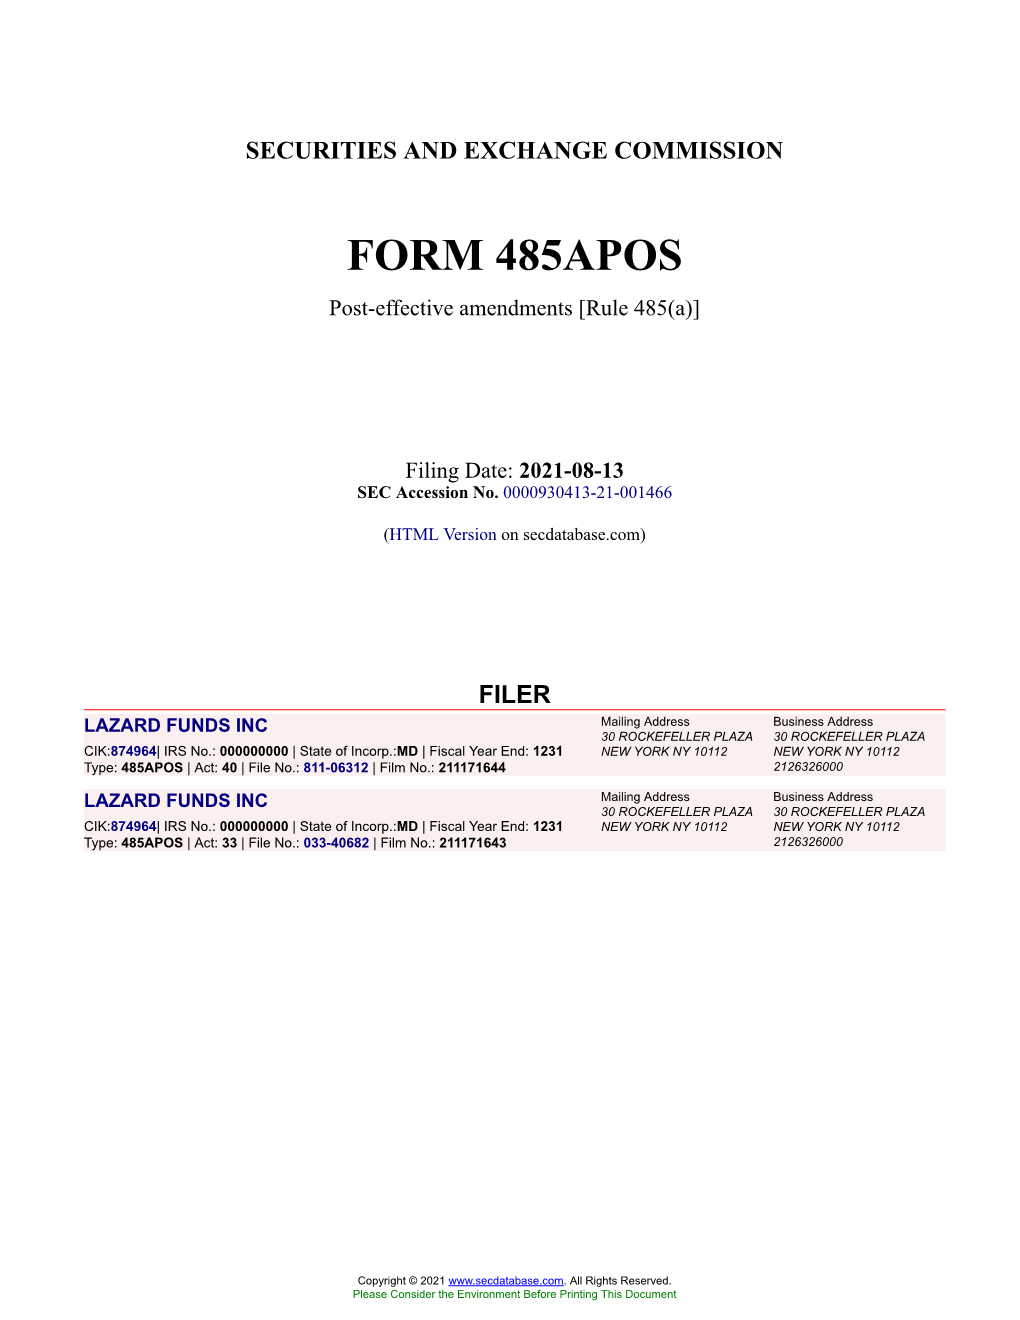 LAZARD FUNDS INC Form 485APOS Filed 2021